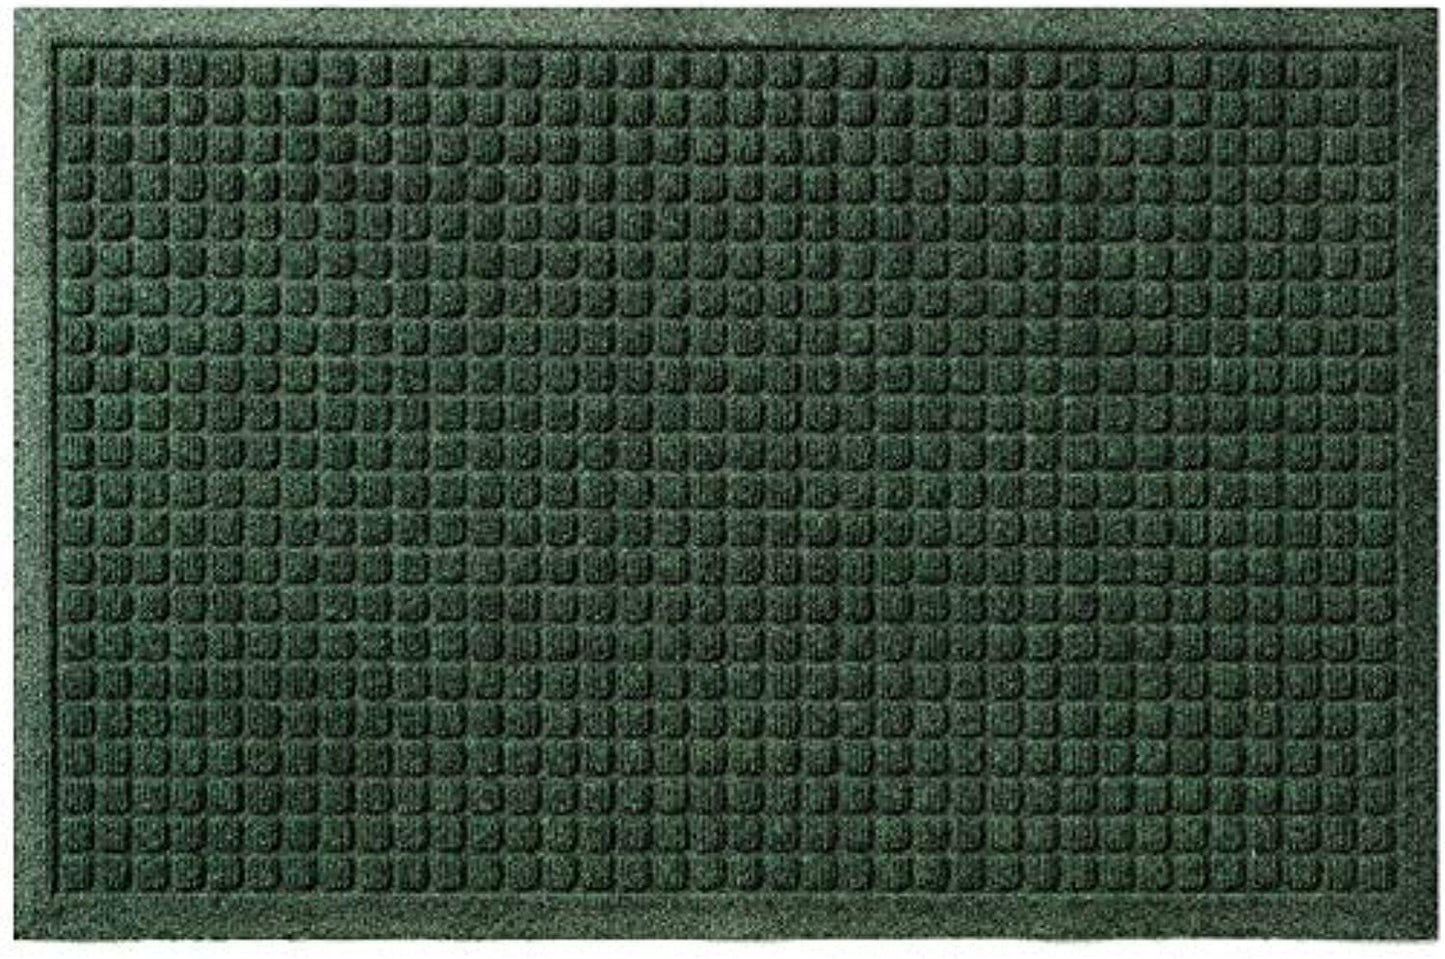 Gorilla Grip Durable All Weather Absorbent Doormat  Dries Quickly  Absorbs Up to 1.7 Cups of Water  Stain and Fade Resistant  Captures Dirt  Indoor and Outdoor Mats  Boot Scraper  29x17  Green